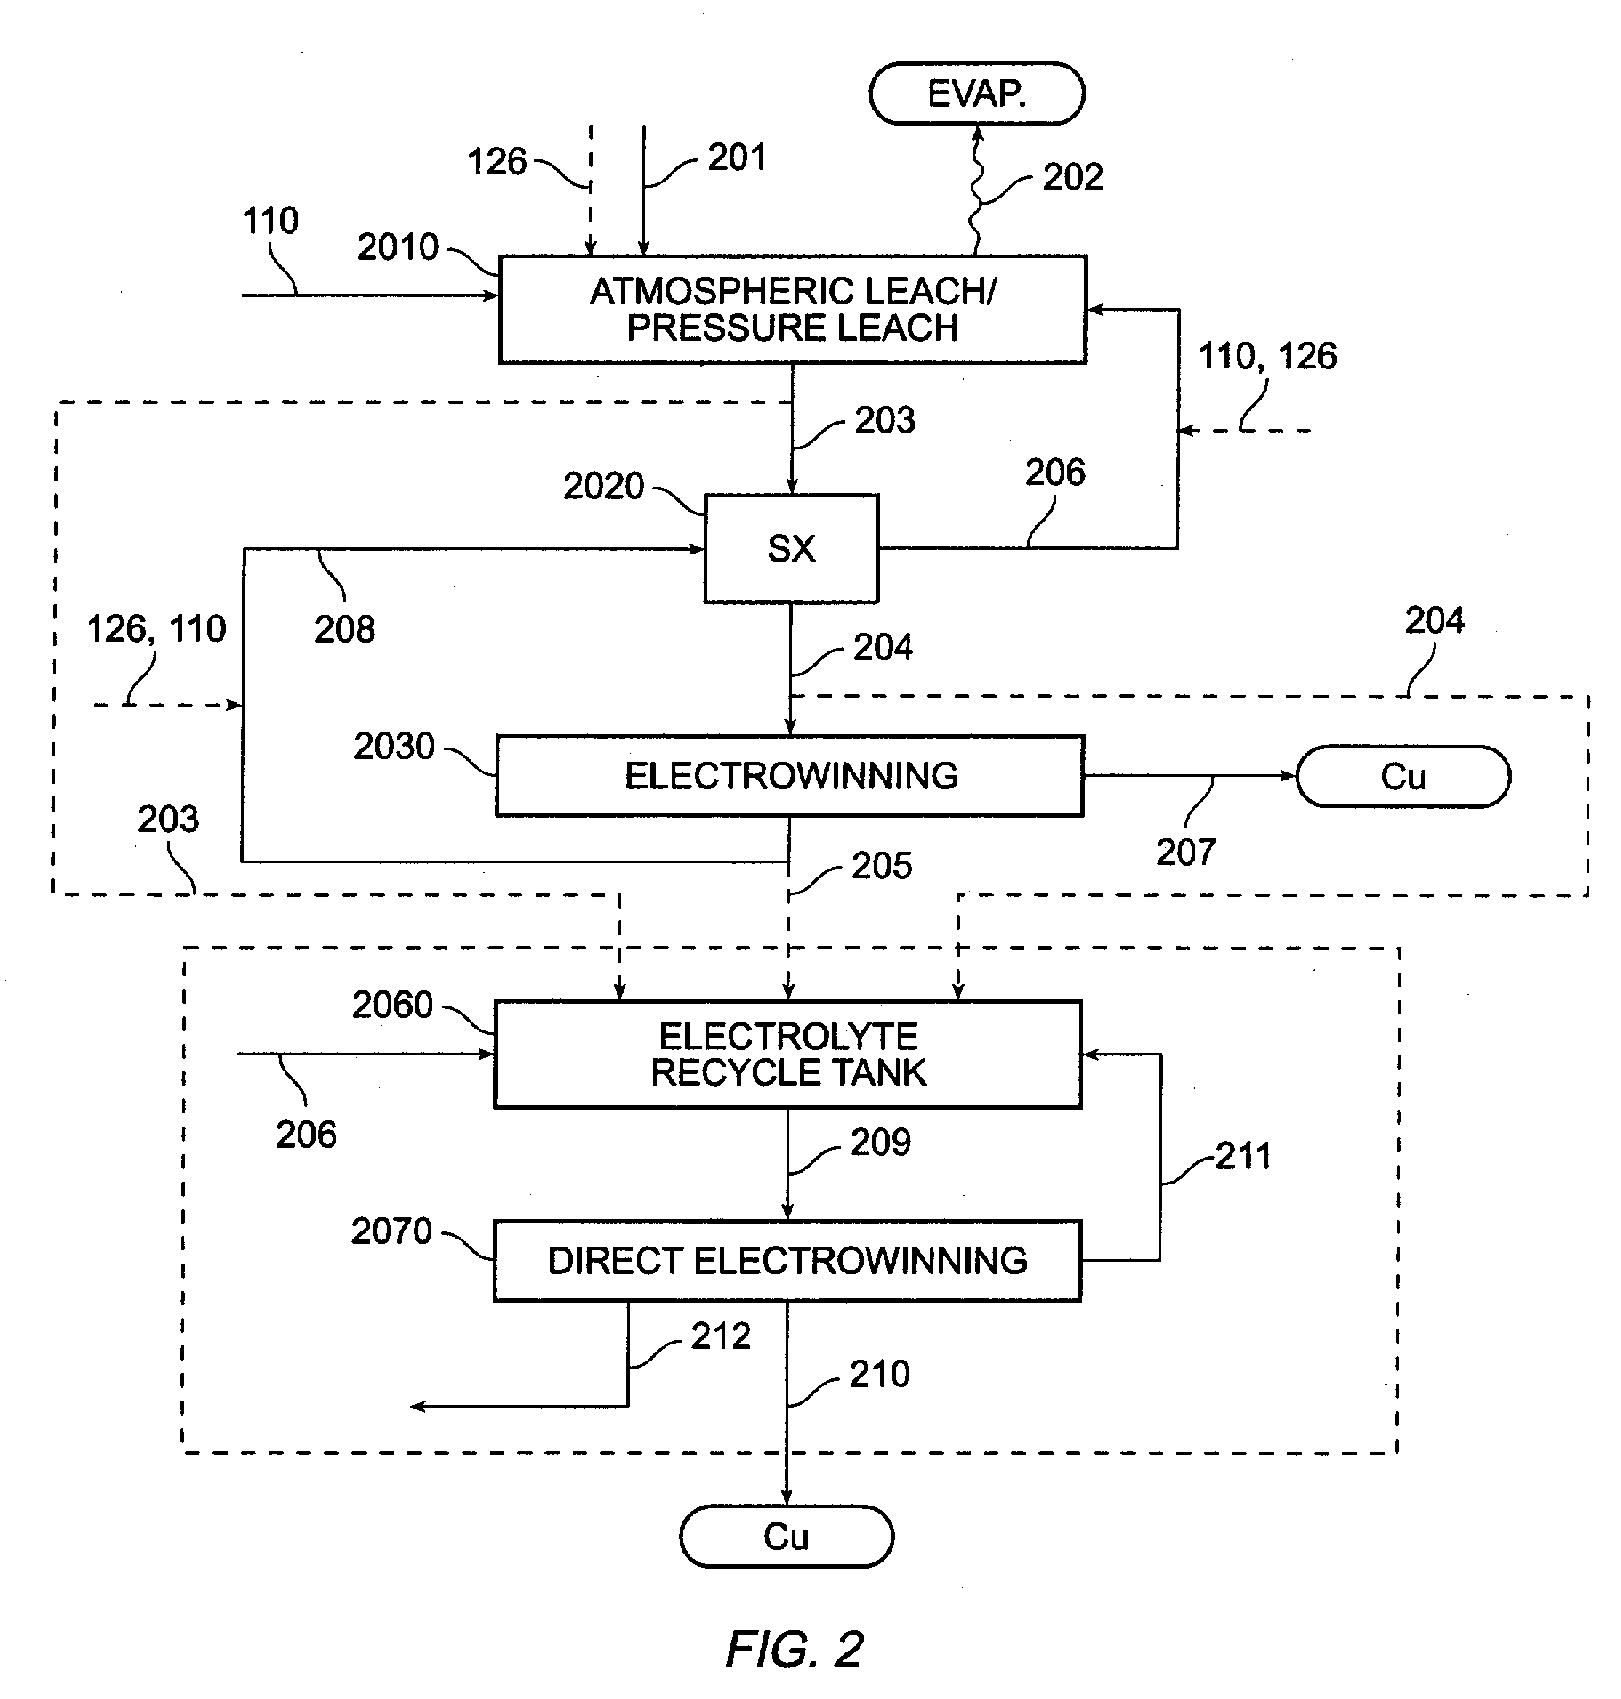 Process for multiple stage direct electrowinning of copper